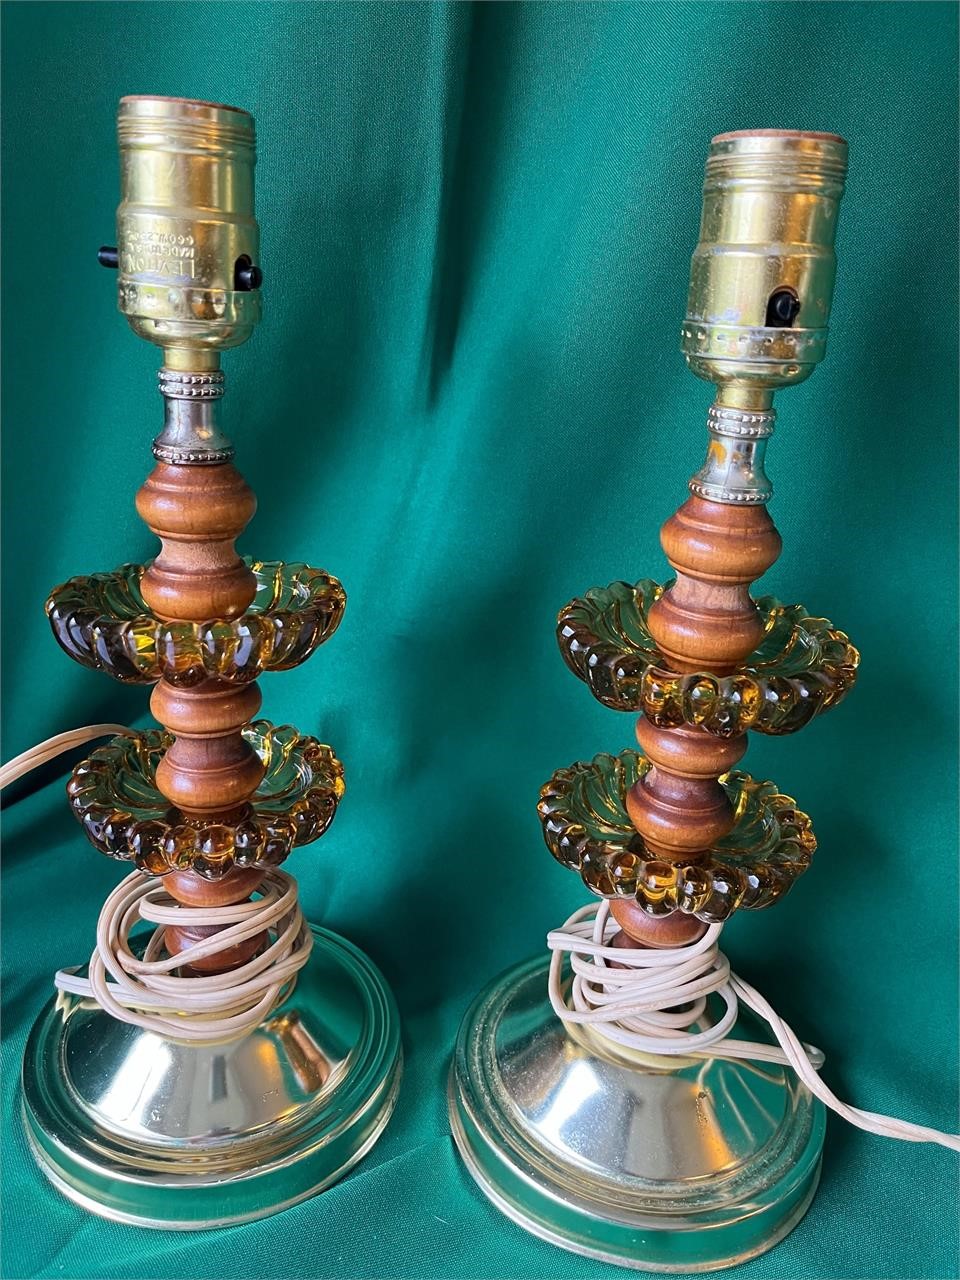 2 Vintage Lamps 12” tall